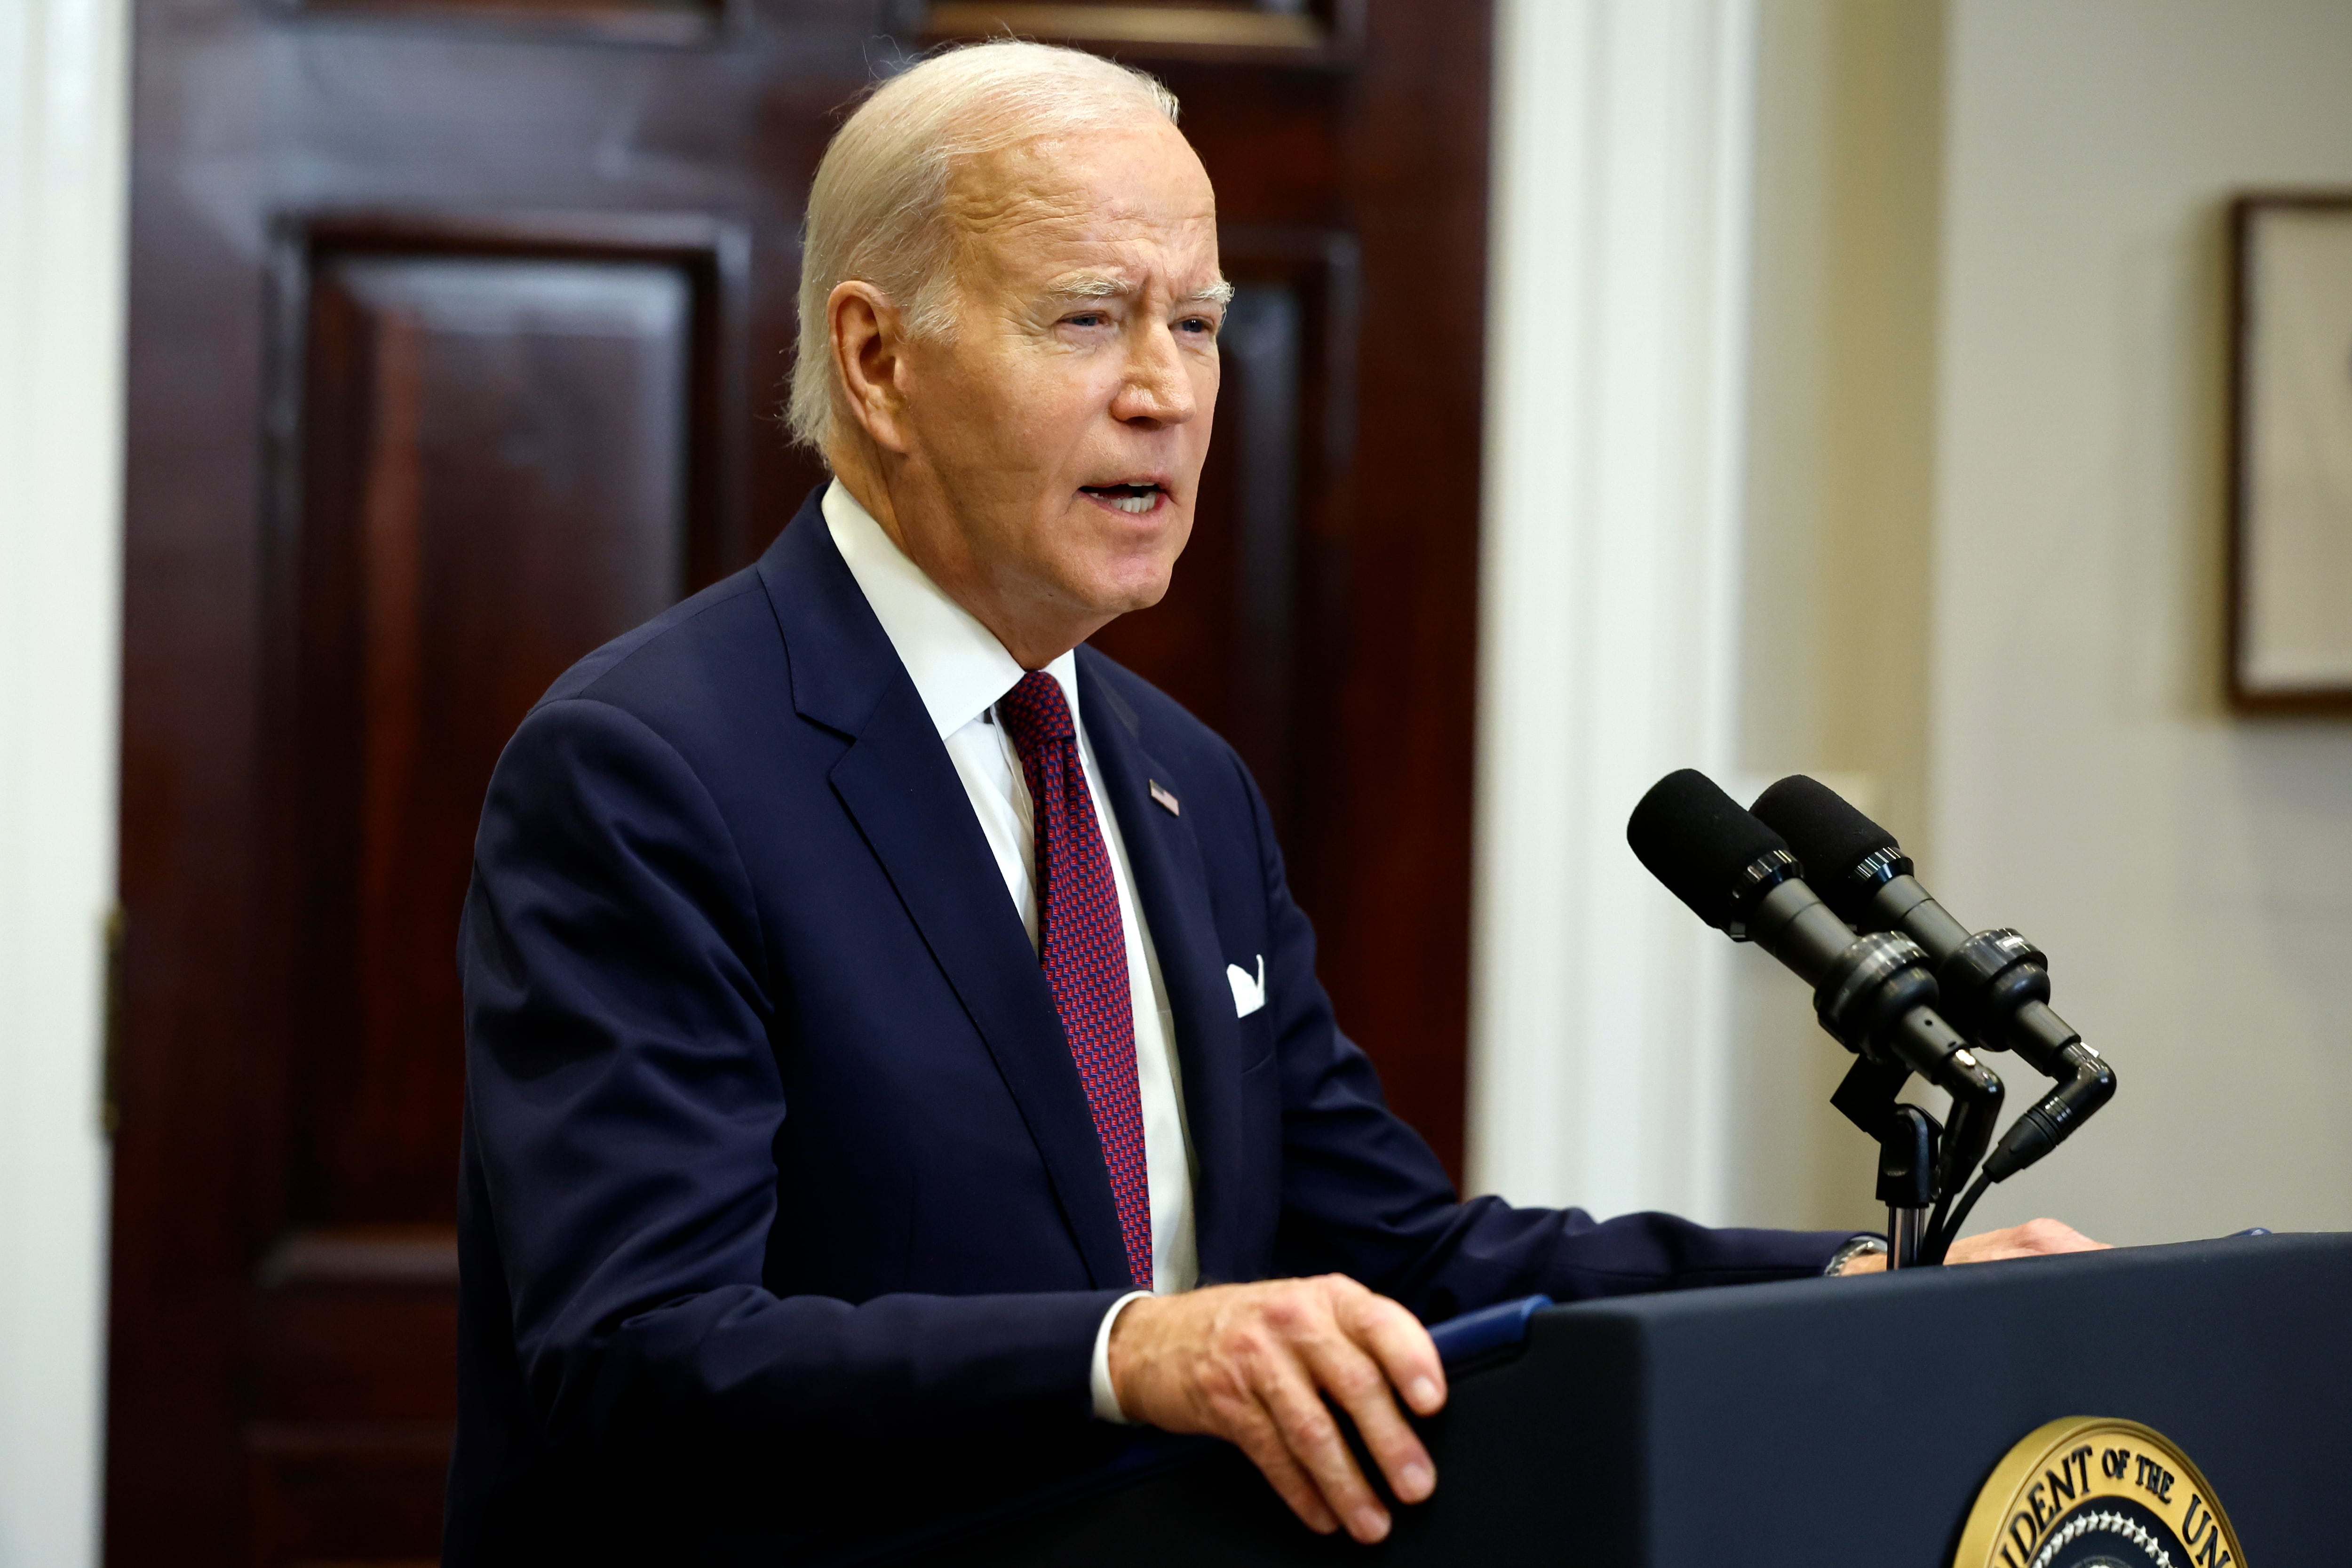 U.S. President Joe Biden speaks into a microphone while wearing a suit in the White House.